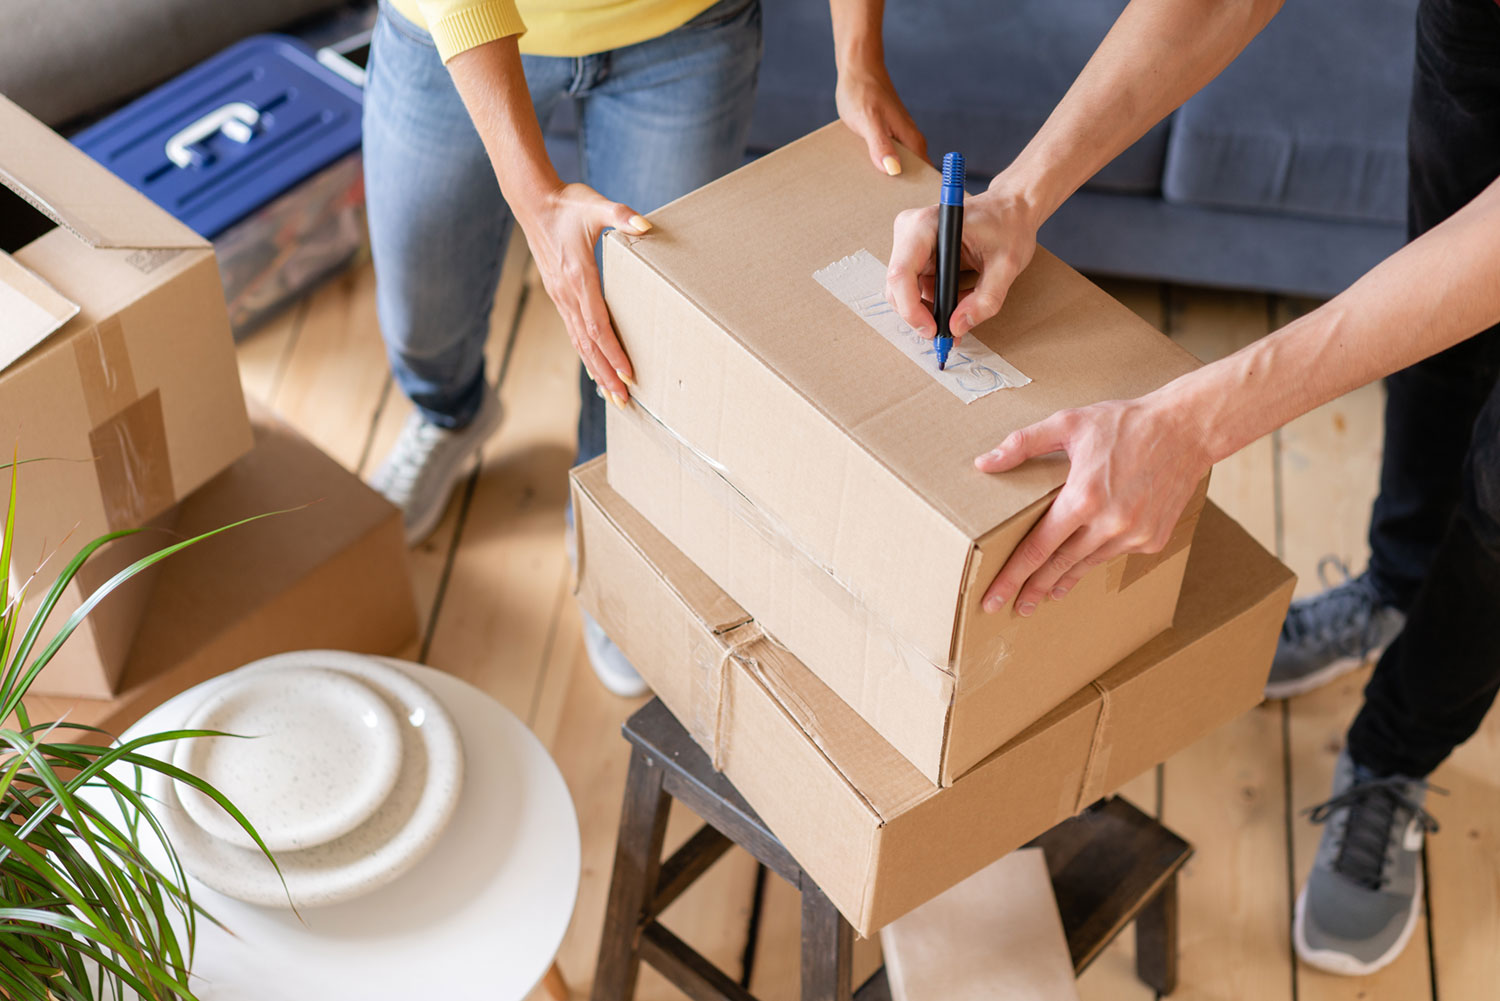 How to Safely Pack Your Electronics for Moving?